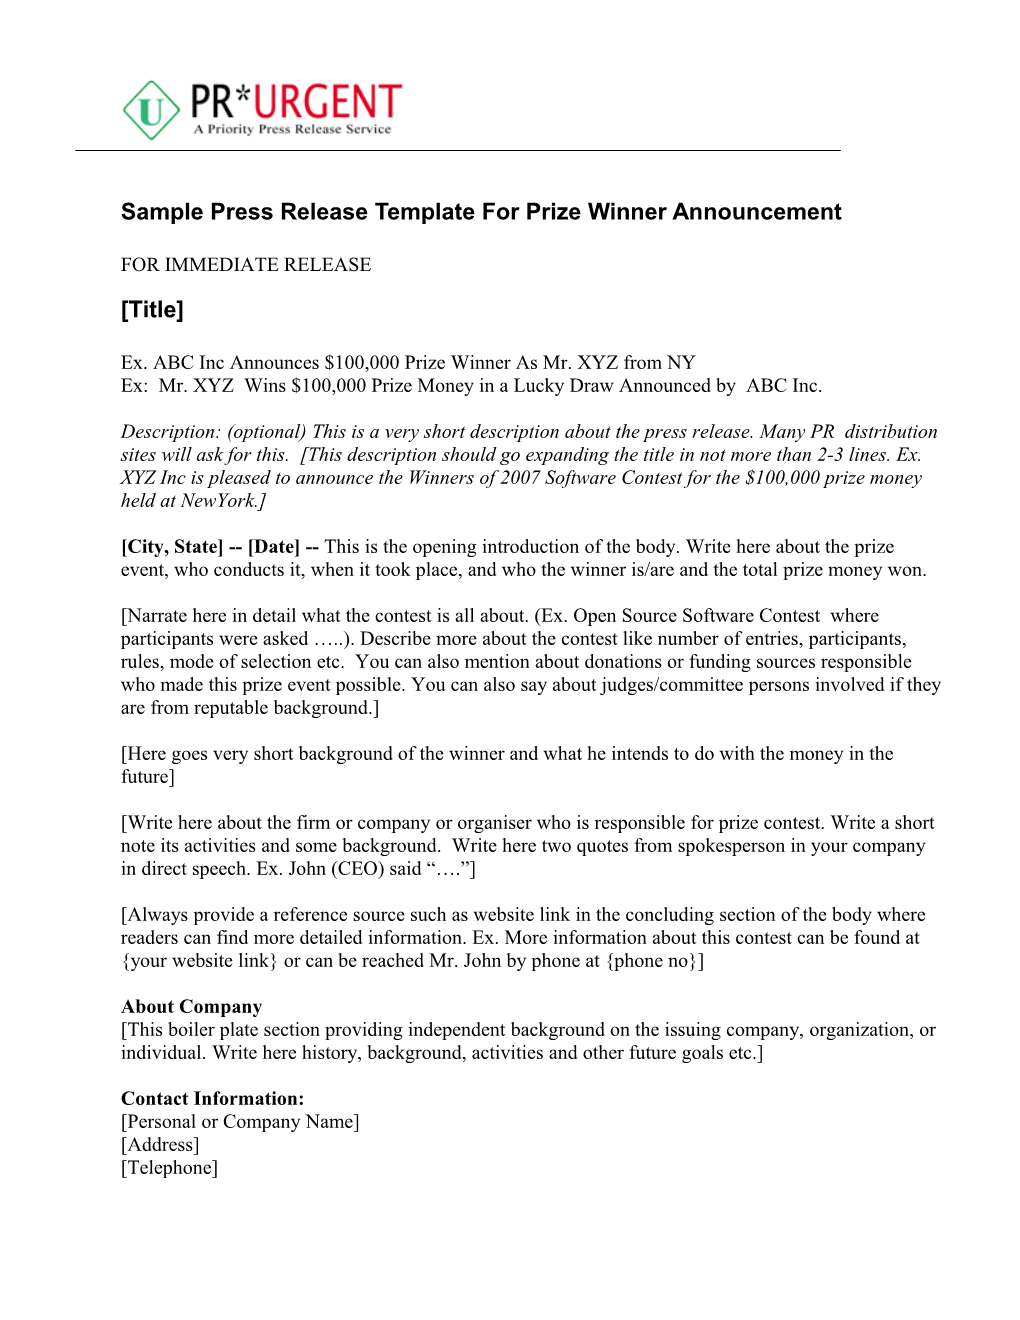 Sample Press Release Template for Prize Winner Announcement